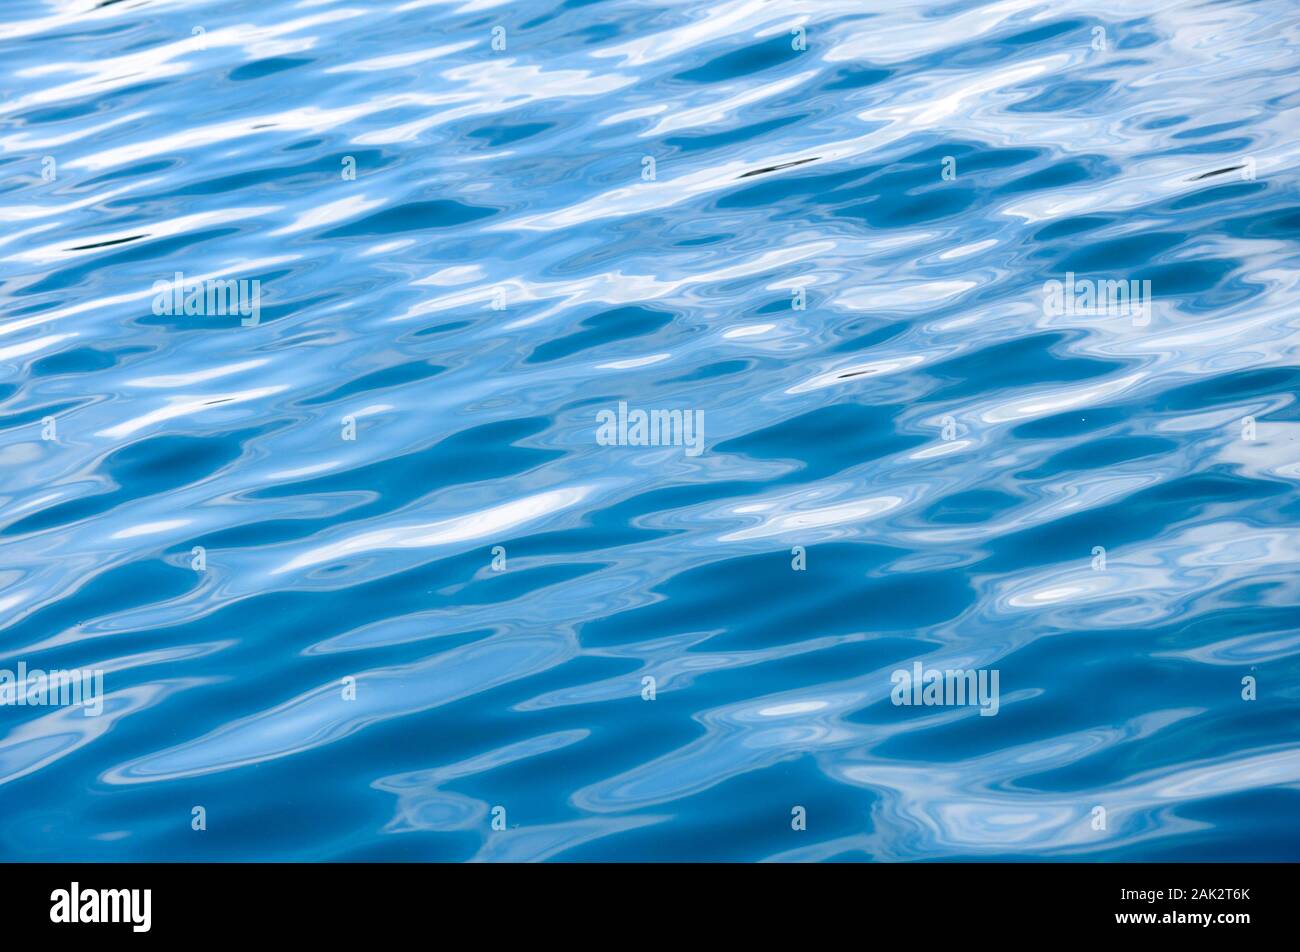 Ripples in the boating lake, South Marine Park, South Shields Stock Photo